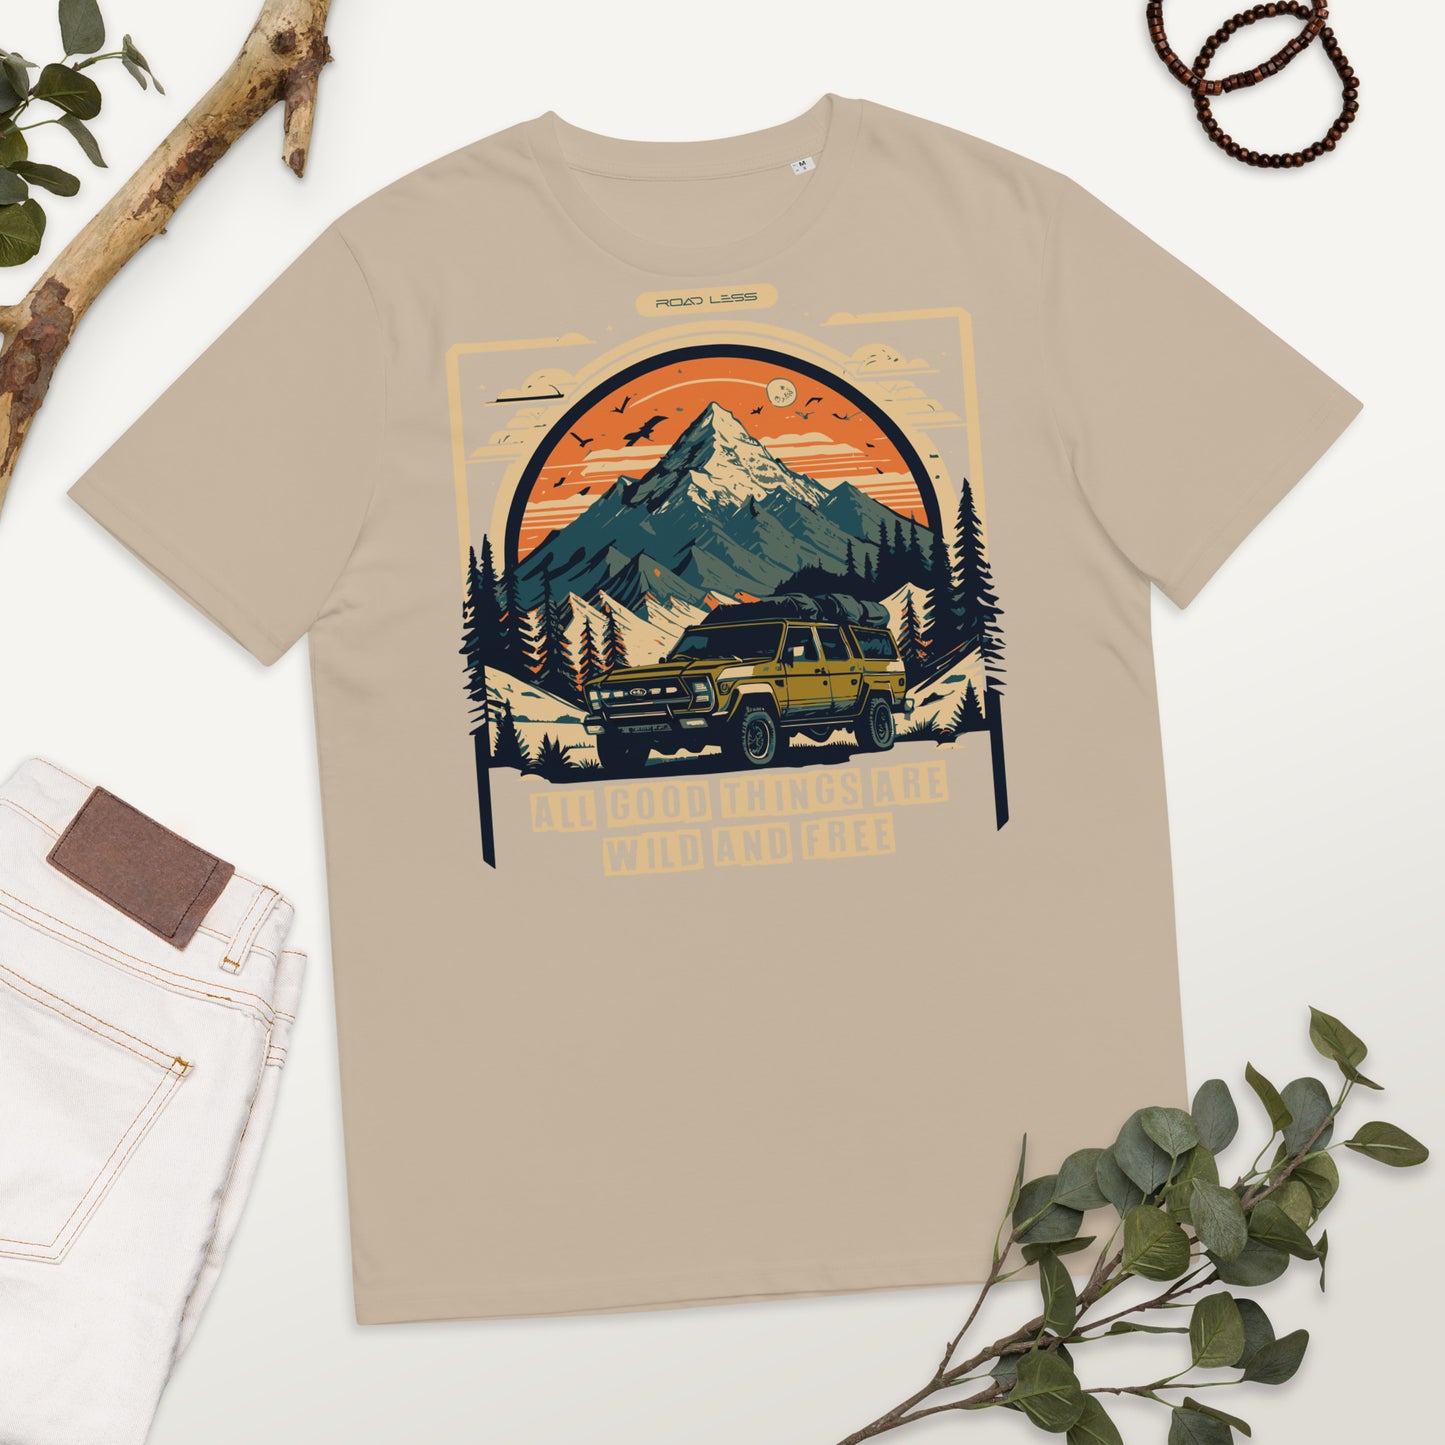 Unisex-Bio-Baumwoll-T-Shirt (All good things are wild and free)